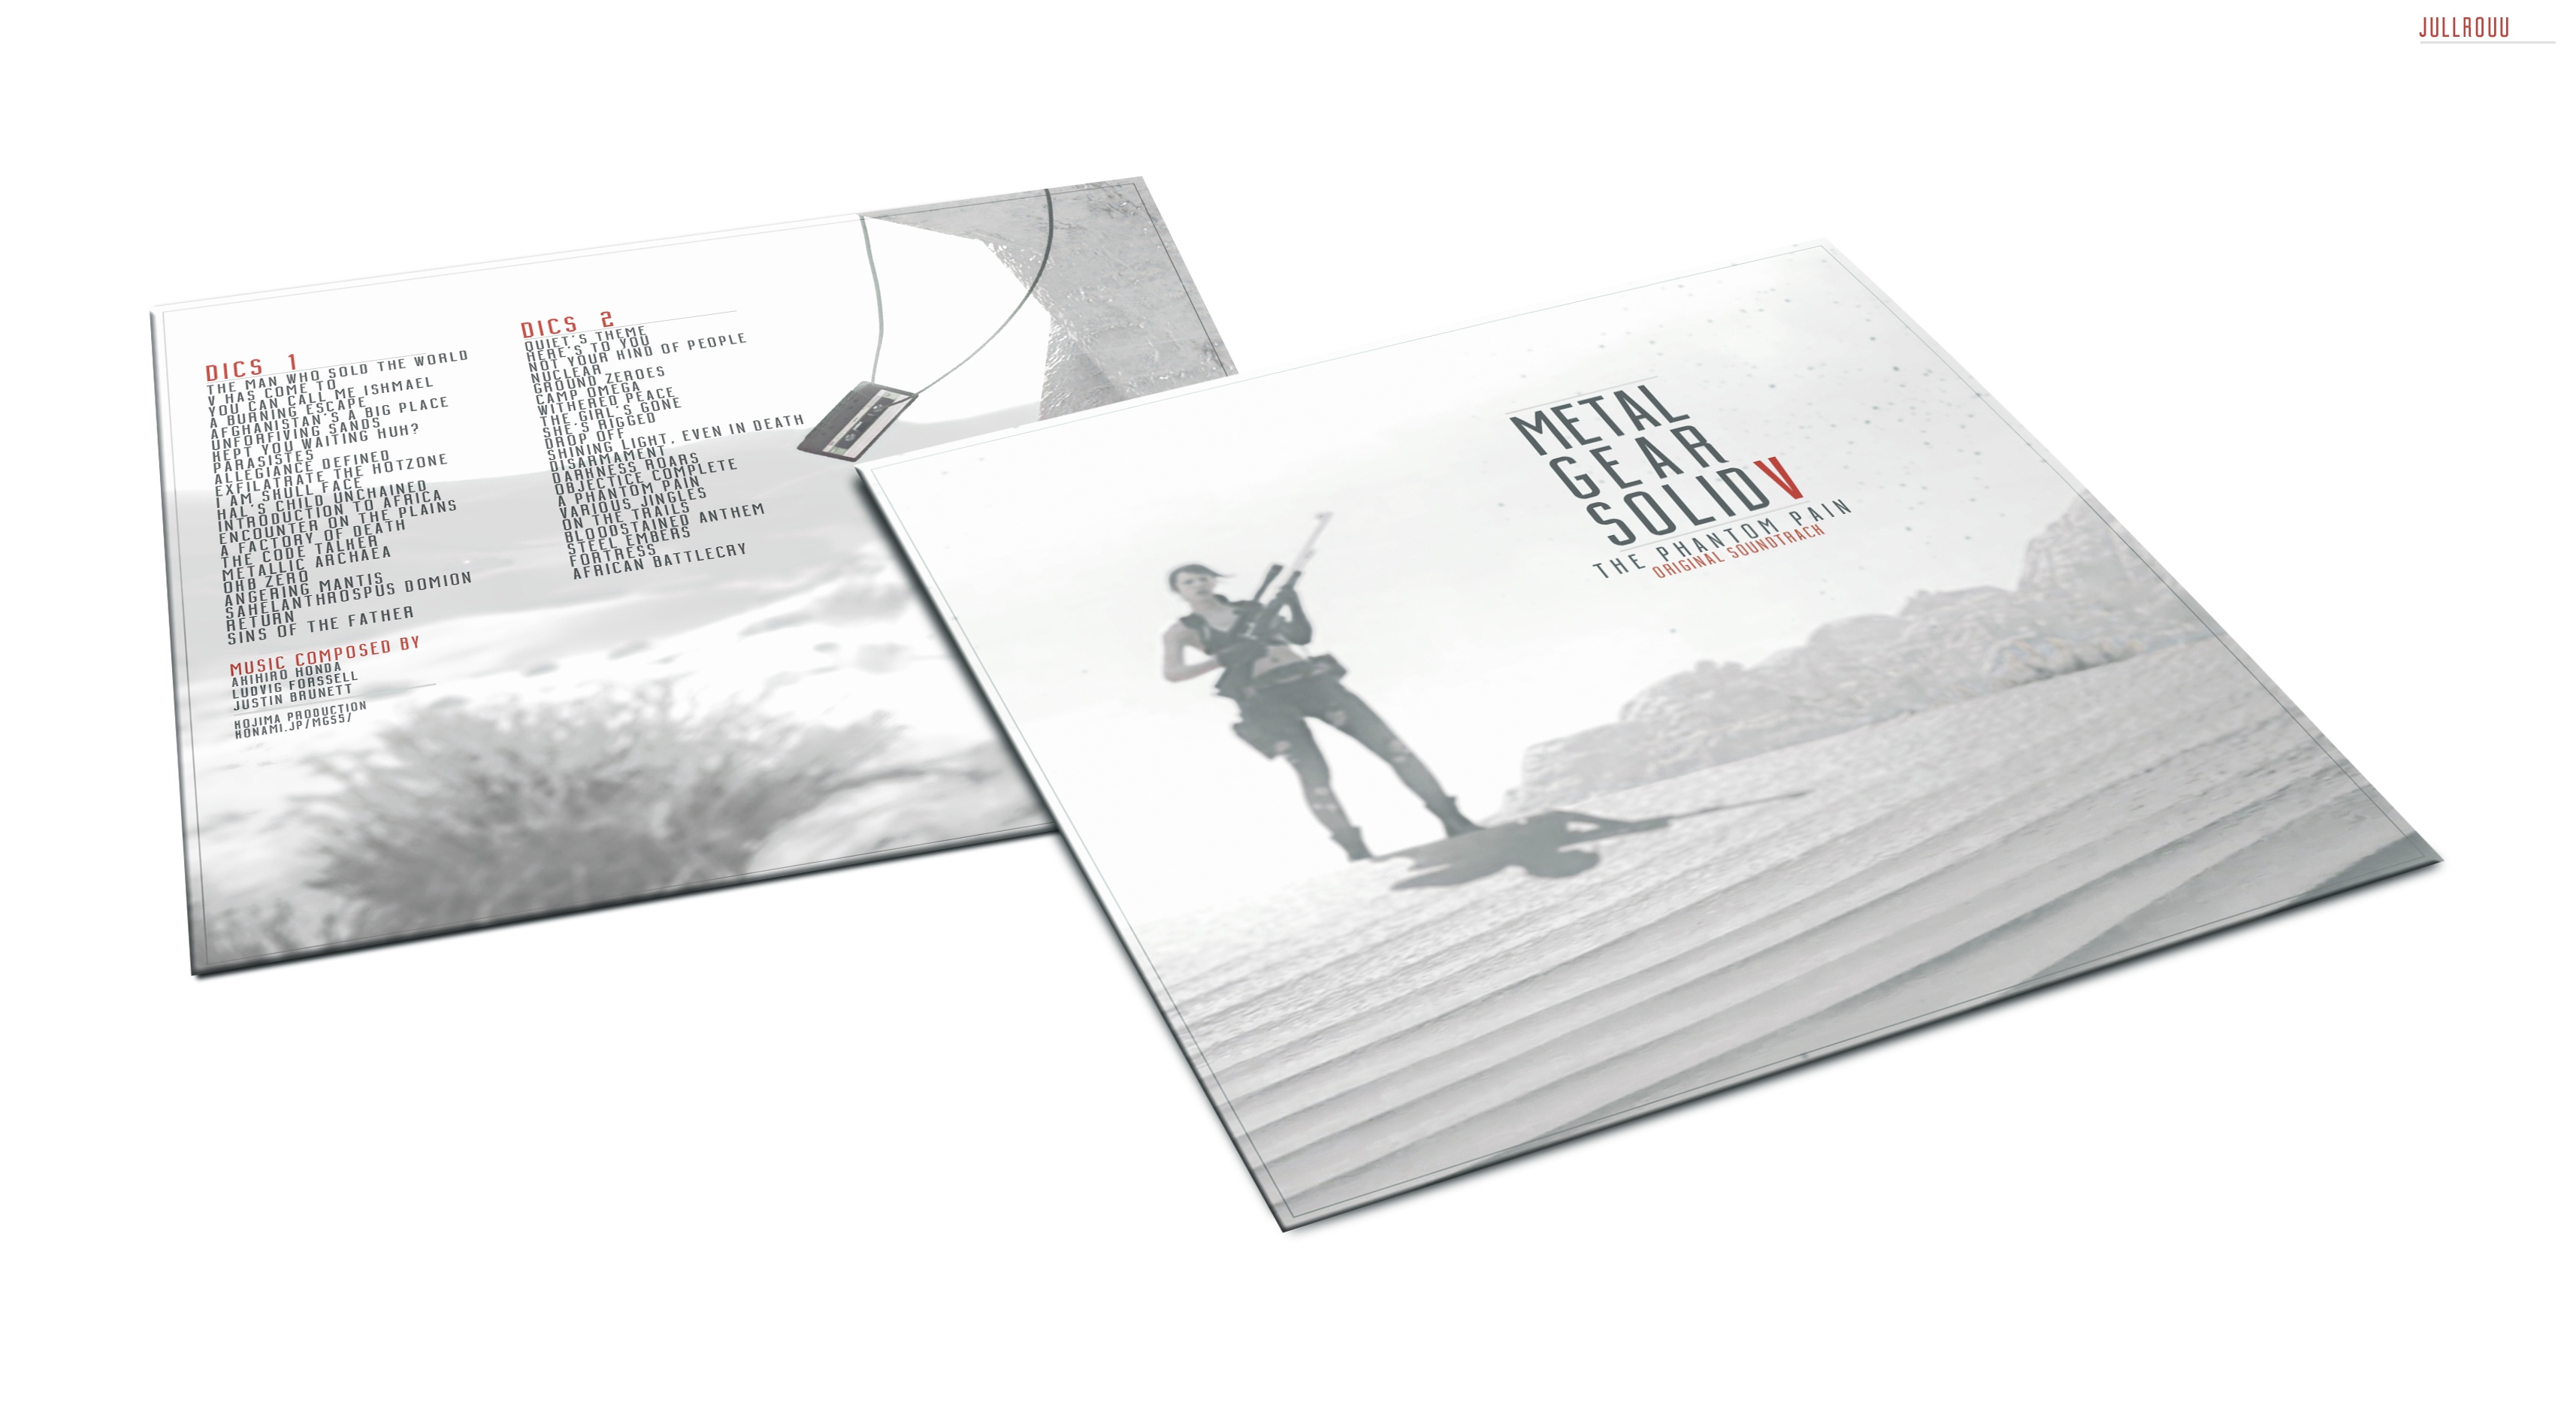 Metal Gear Solid V: The Phantom Pain OST box cover